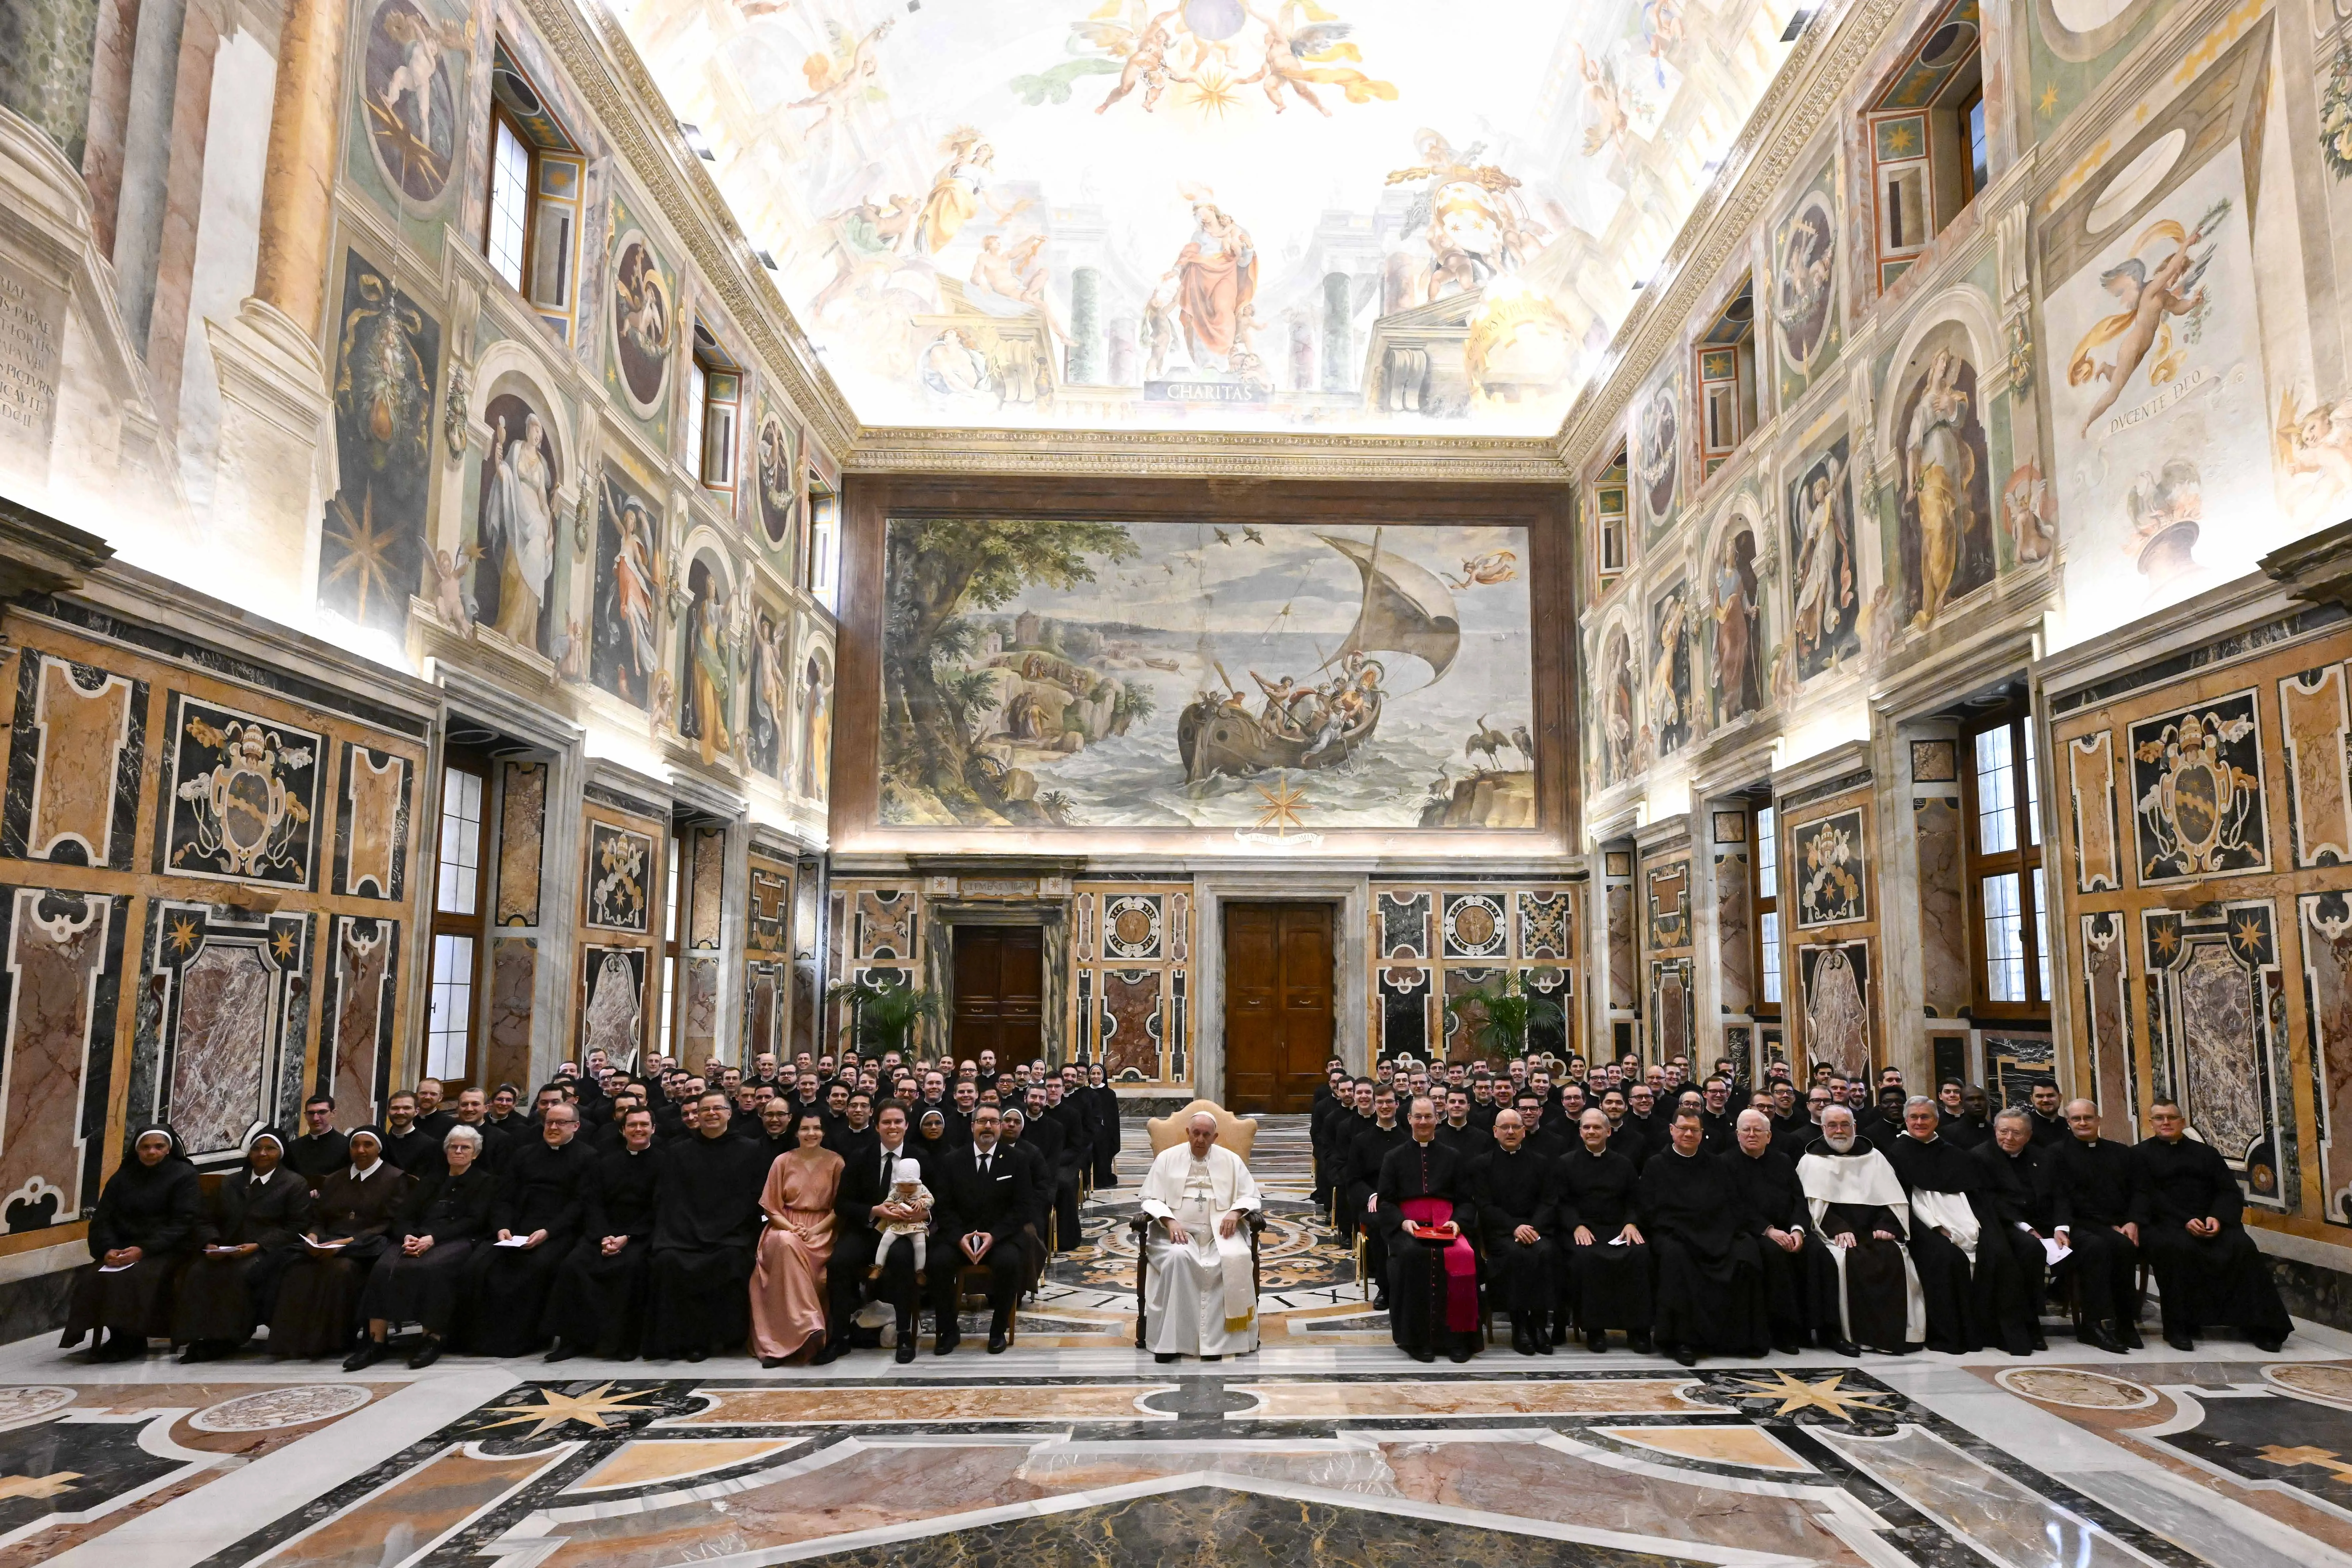 Pope Francis met with seminarians, staff, and faculty of the Ponitifical North American College in the Vatican's Apostolic Palace on Jan. 14, 2023. Vatican Media